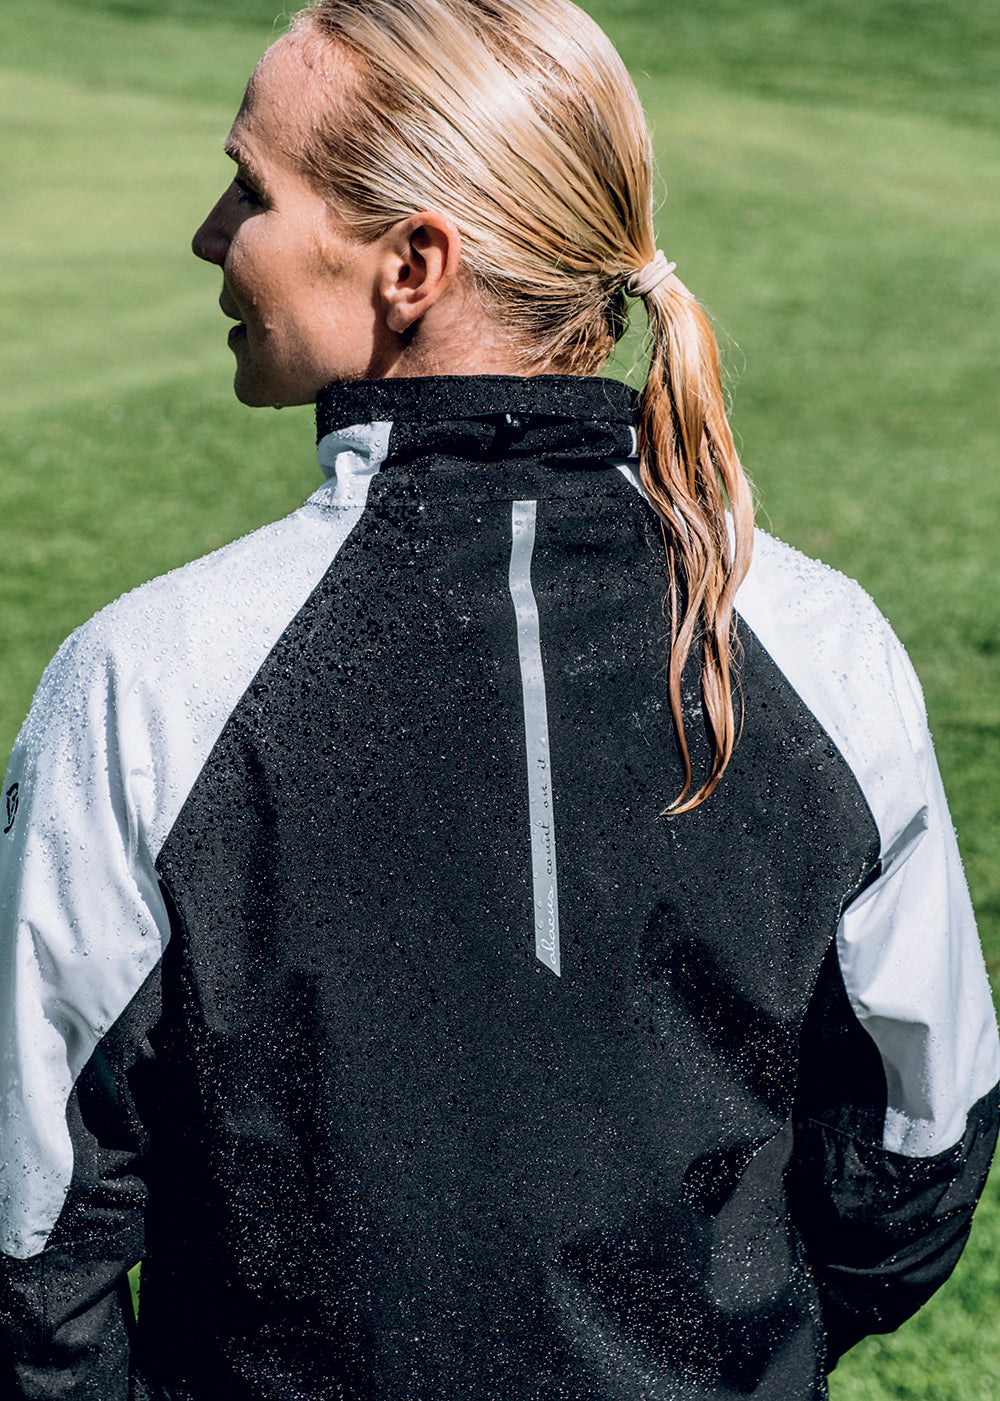 The best golf waterproofs for any weather (mainly rain) | T3